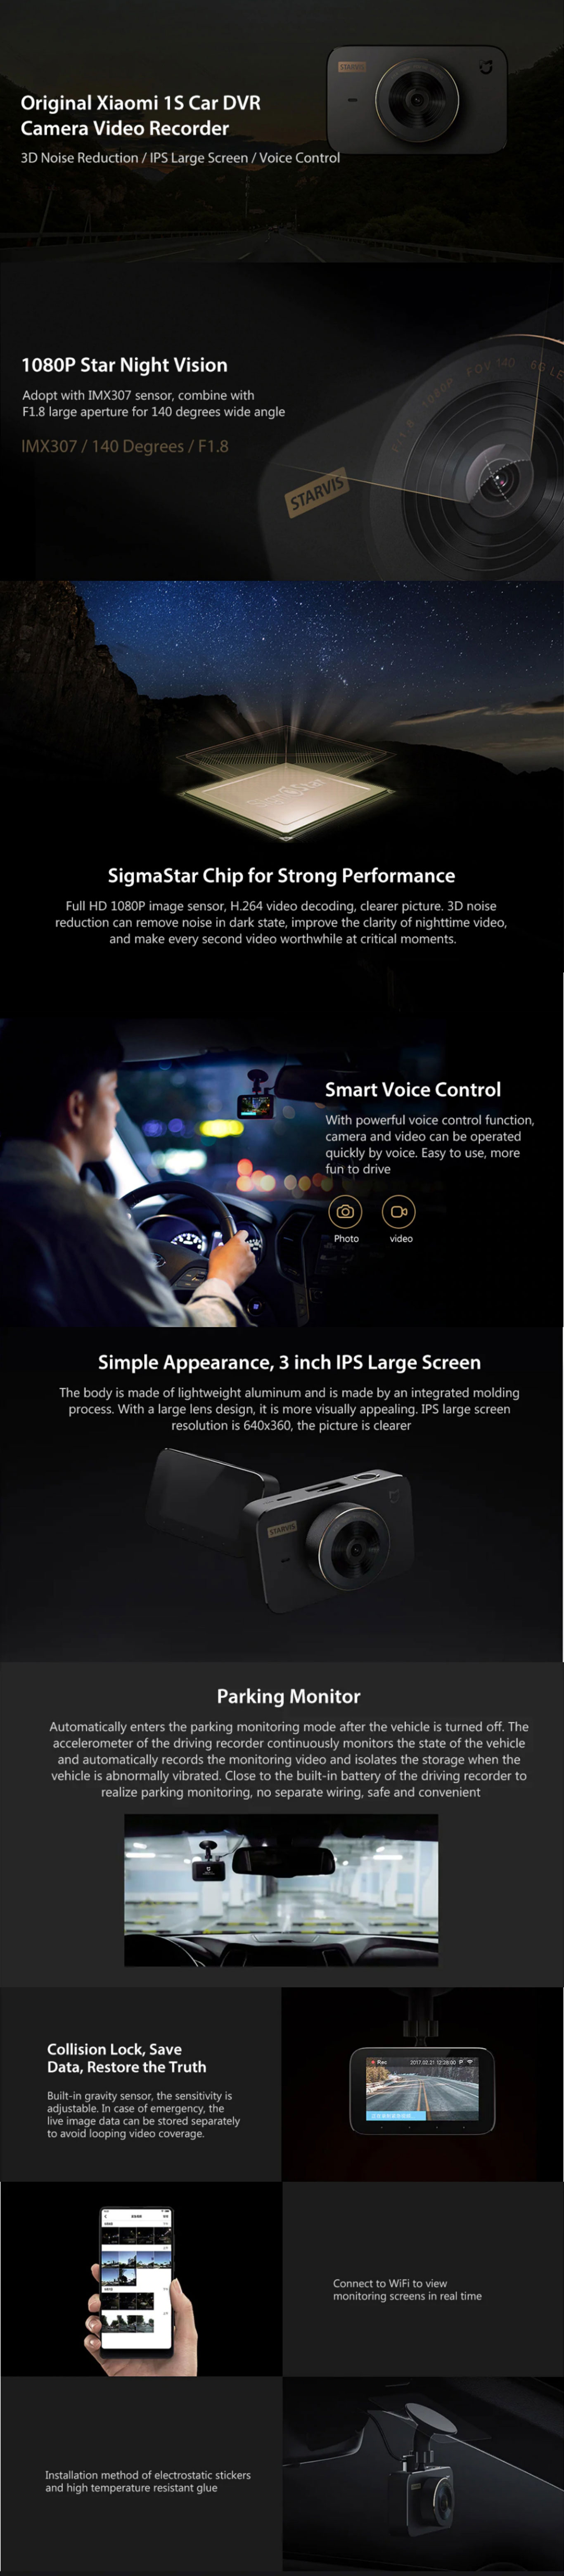 Camxiam7703409 Lp Xiaomi &Lt;H1 Class=&Quot;Title&Quot;&Gt;Mi Dash Cam 1S&Lt;/H1&Gt; &Lt;P Class=&Quot;Desc&Quot;&Gt;Outstanding Night-Time Picture&Lt;/P&Gt; &Lt;P Class=&Quot;Feature&Quot;&Gt;Sony Imx307 Image Sensor ｜ 3D Noise Cancellation ｜ Ips Large Display&Lt;/P&Gt; &Lt;Div Class=&Quot;Text-Box&Quot;&Gt; &Lt;H1 Class=&Quot;Title&Quot;&Gt;1080P Starvis Night Vision&Lt;/H1&Gt; &Lt;P Class=&Quot;Desc-Regular&Quot;&Gt;Clearer Picture At Night&Lt;/P&Gt; &Lt;P Class=&Quot;Feature&Quot;&Gt;Behind The F/1.8 Aperture Lens Of The Mi Dash Cam 1S Is A Sony Imx307 Starvis* Night Vision Sensor That Provides Remarkable Low-Light Imaging Results. The Dash Cam Also Features A 140° Wide-Angle View, Allowing It To Record Three Lanes Of Traffic At Once.&Lt;/P&Gt; &Lt;/Div&Gt; Mi Dash Cam 1S Mi Dash Cam 1S